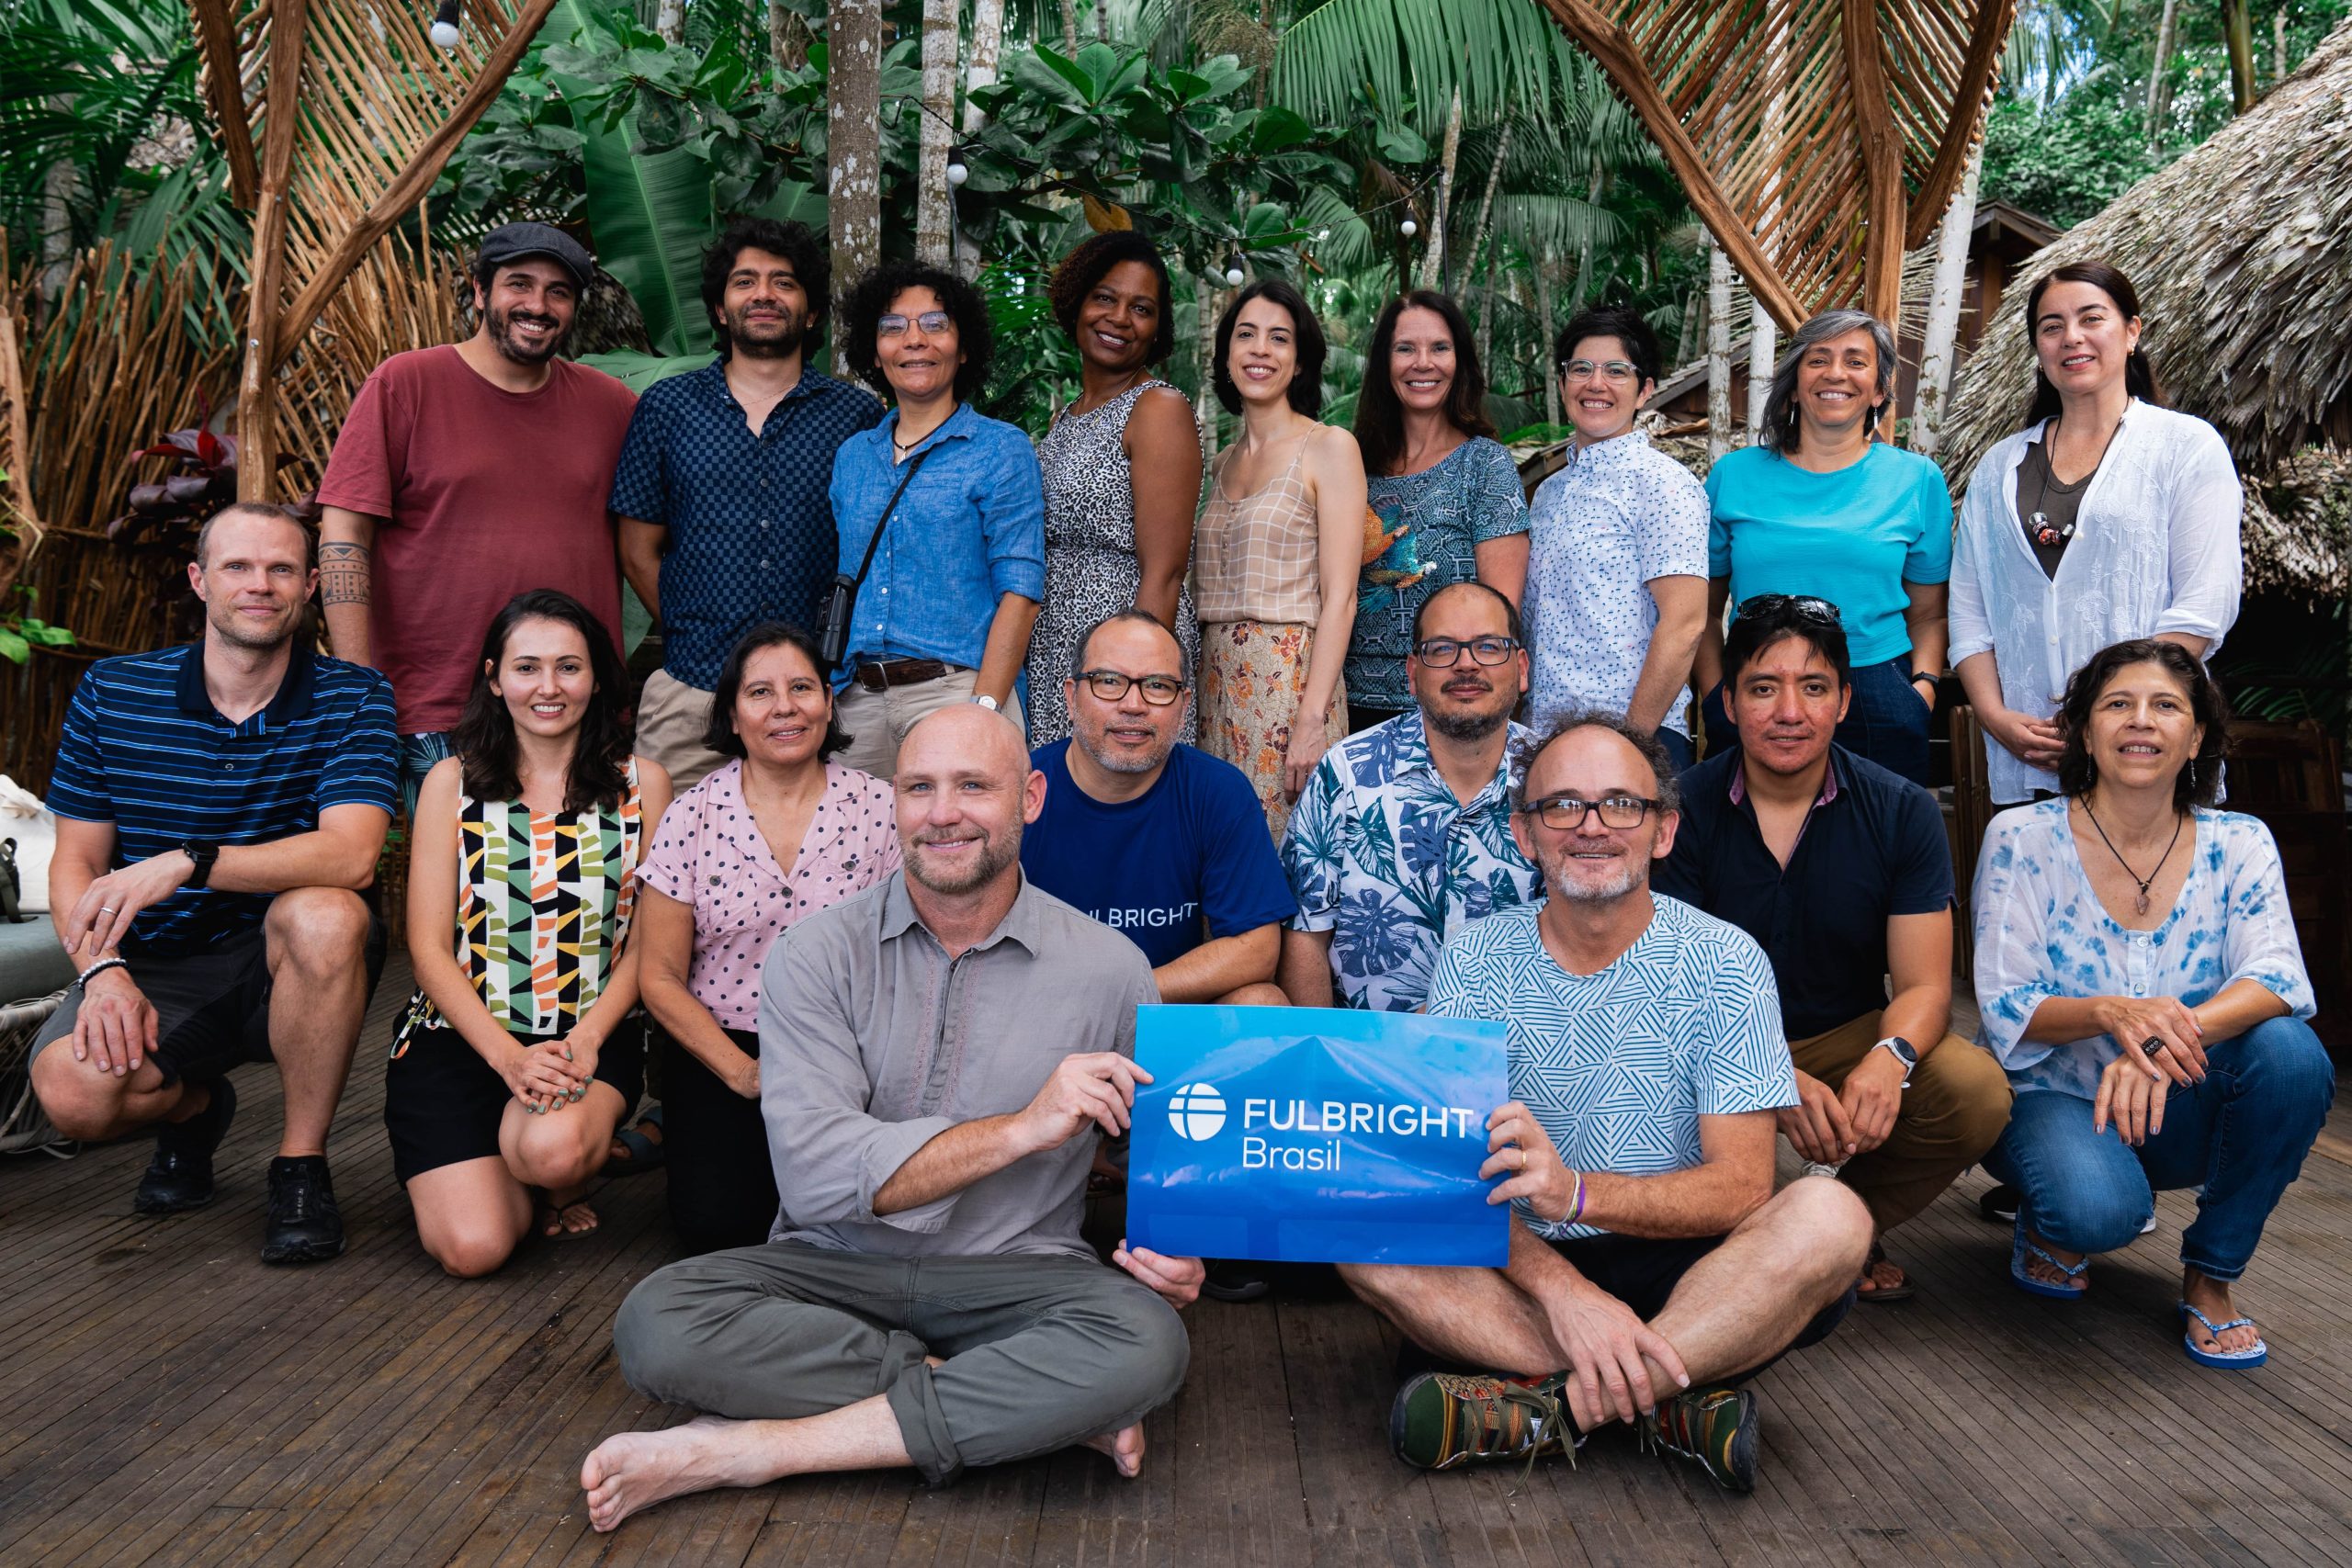 Scholars from the fulbright amazonia in Belem, Para, Brazil, hold a fulbright brazil banner